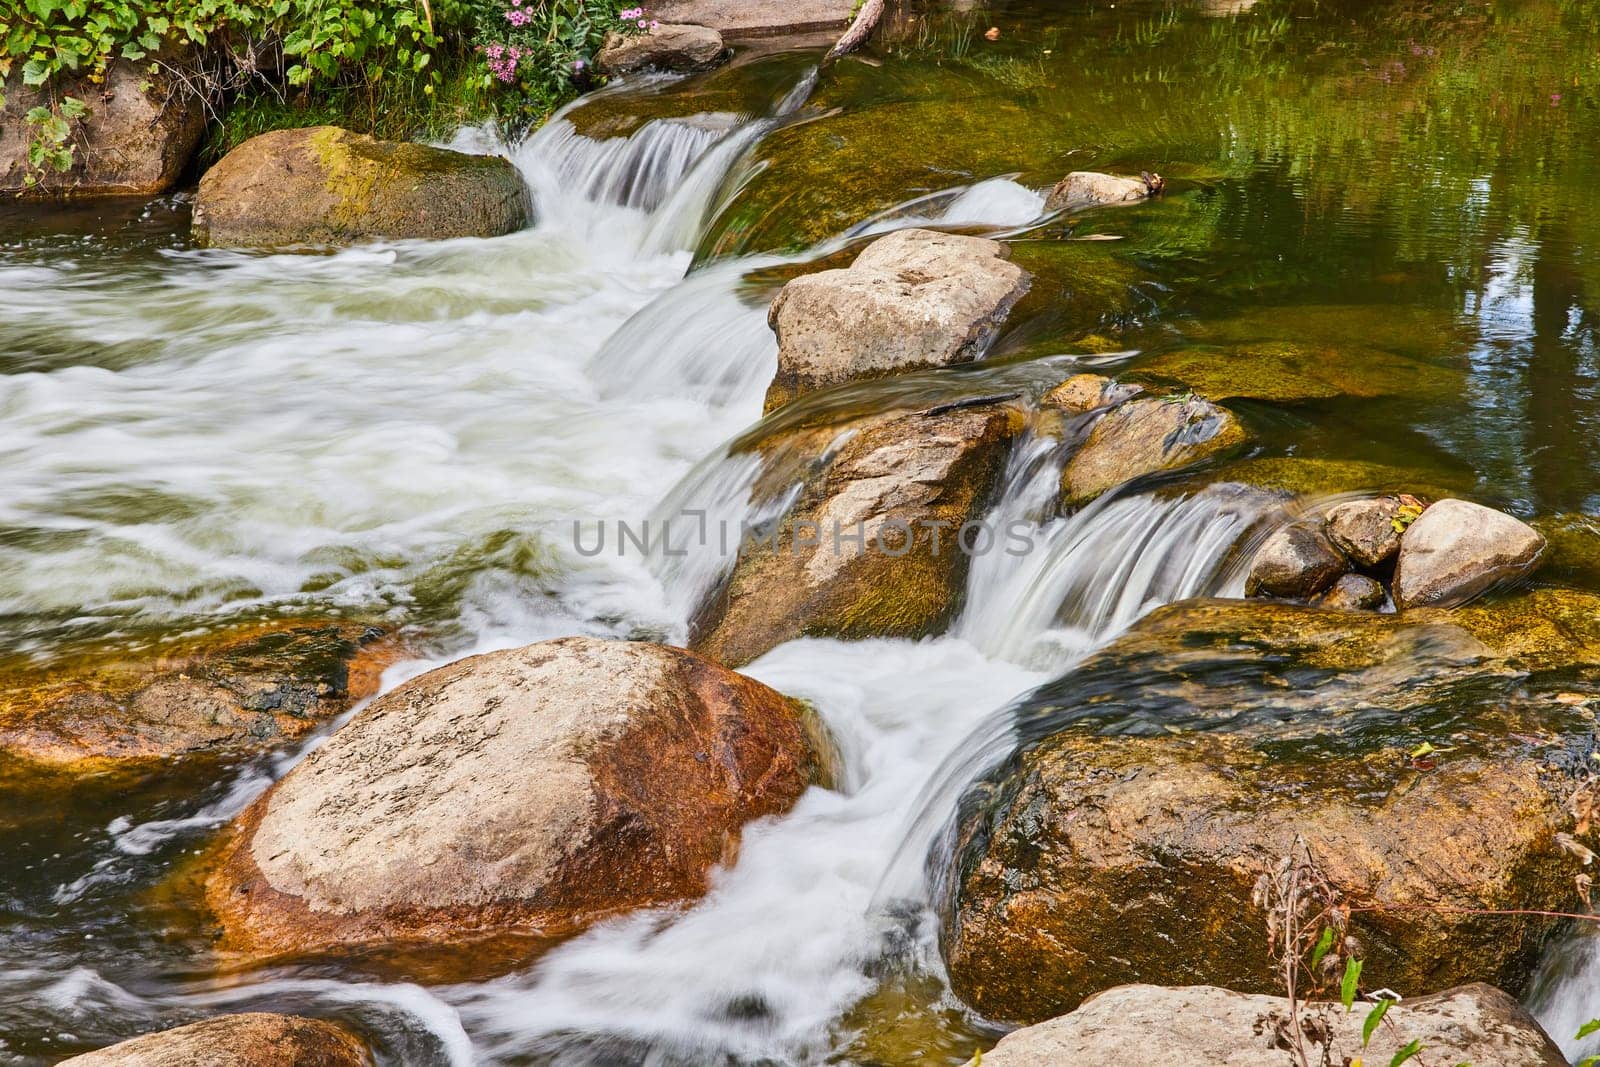 Serene River Flow and Mossy Rocks at Botanic Gardens - Daytime Perspective by njproductions